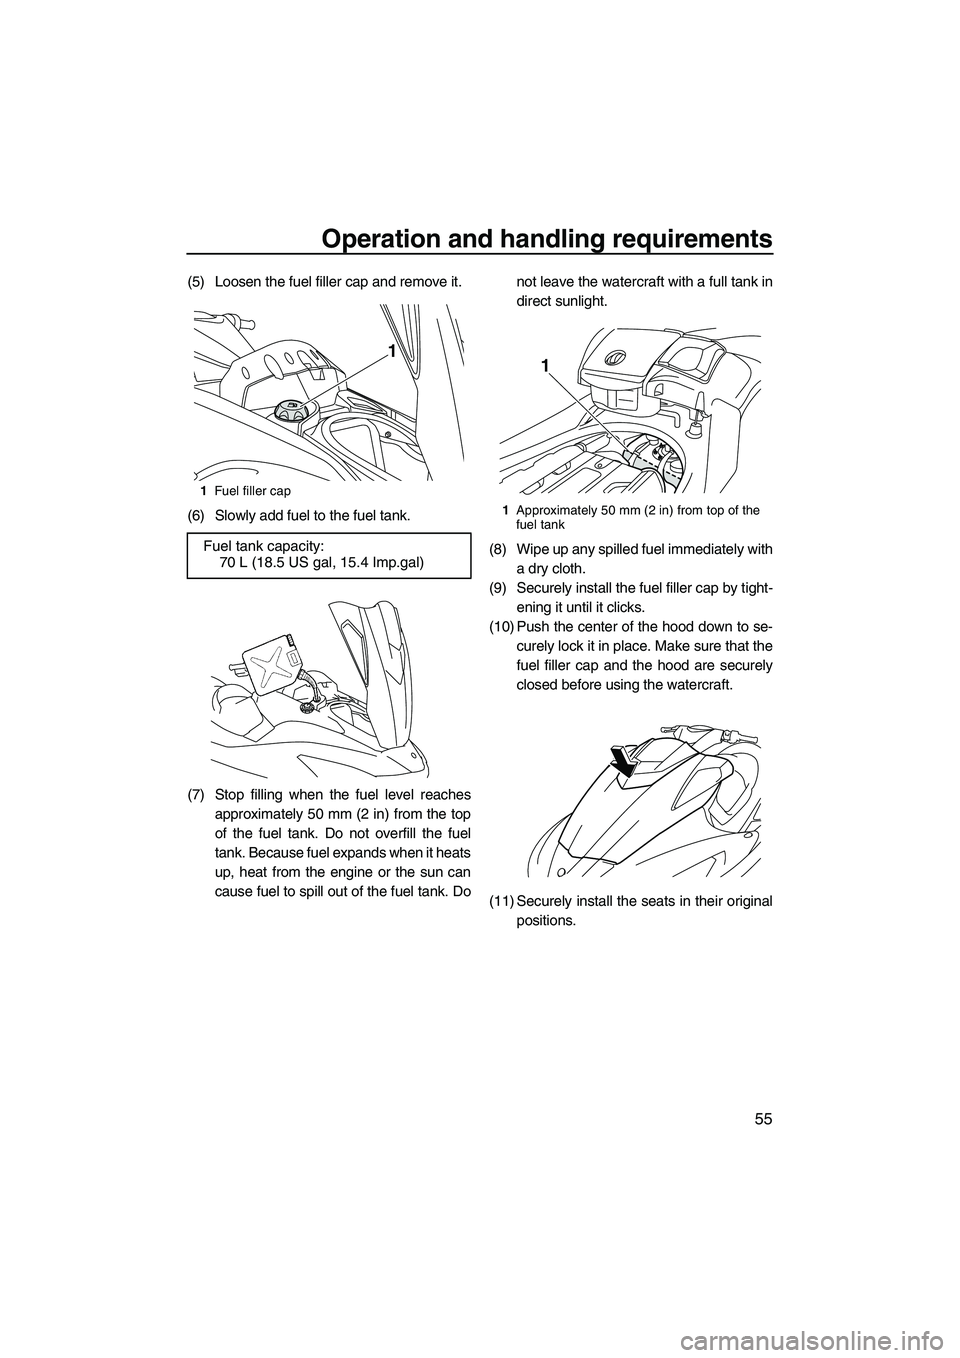 YAMAHA SVHO 2011 User Guide Operation and handling requirements
55
(5) Loosen the fuel filler cap and remove it.
(6) Slowly add fuel to the fuel tank.
(7) Stop filling when the fuel level reaches
approximately 50 mm (2 in) from 